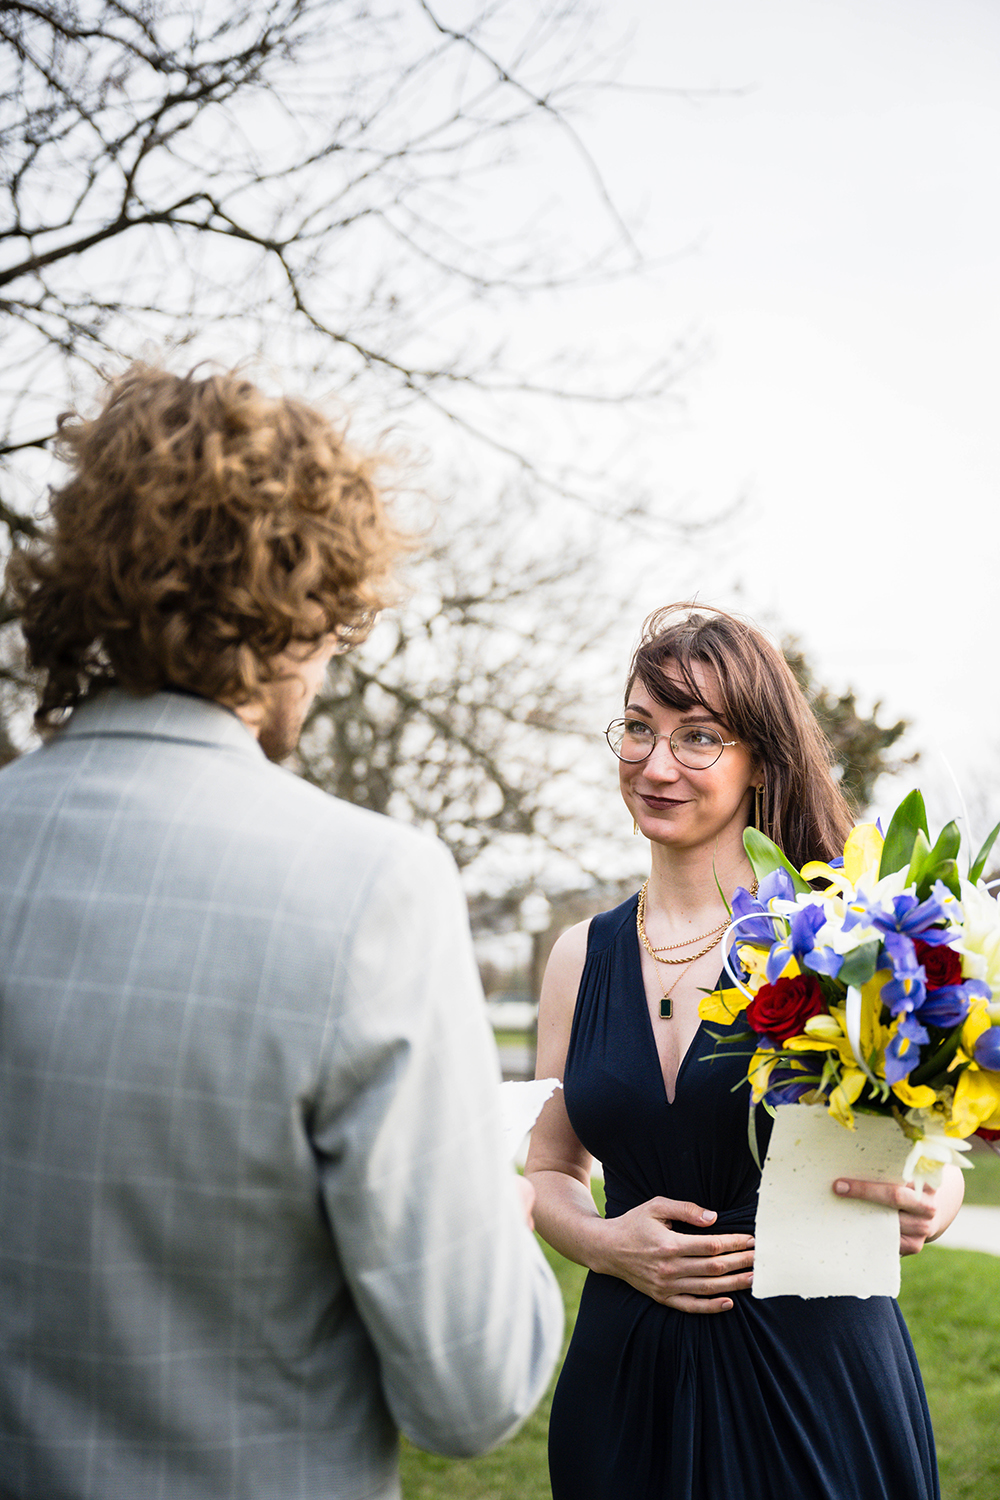 A marrier holds her bouquet and her vows and listens intently as her partner reads his vows to her on their elopement day.